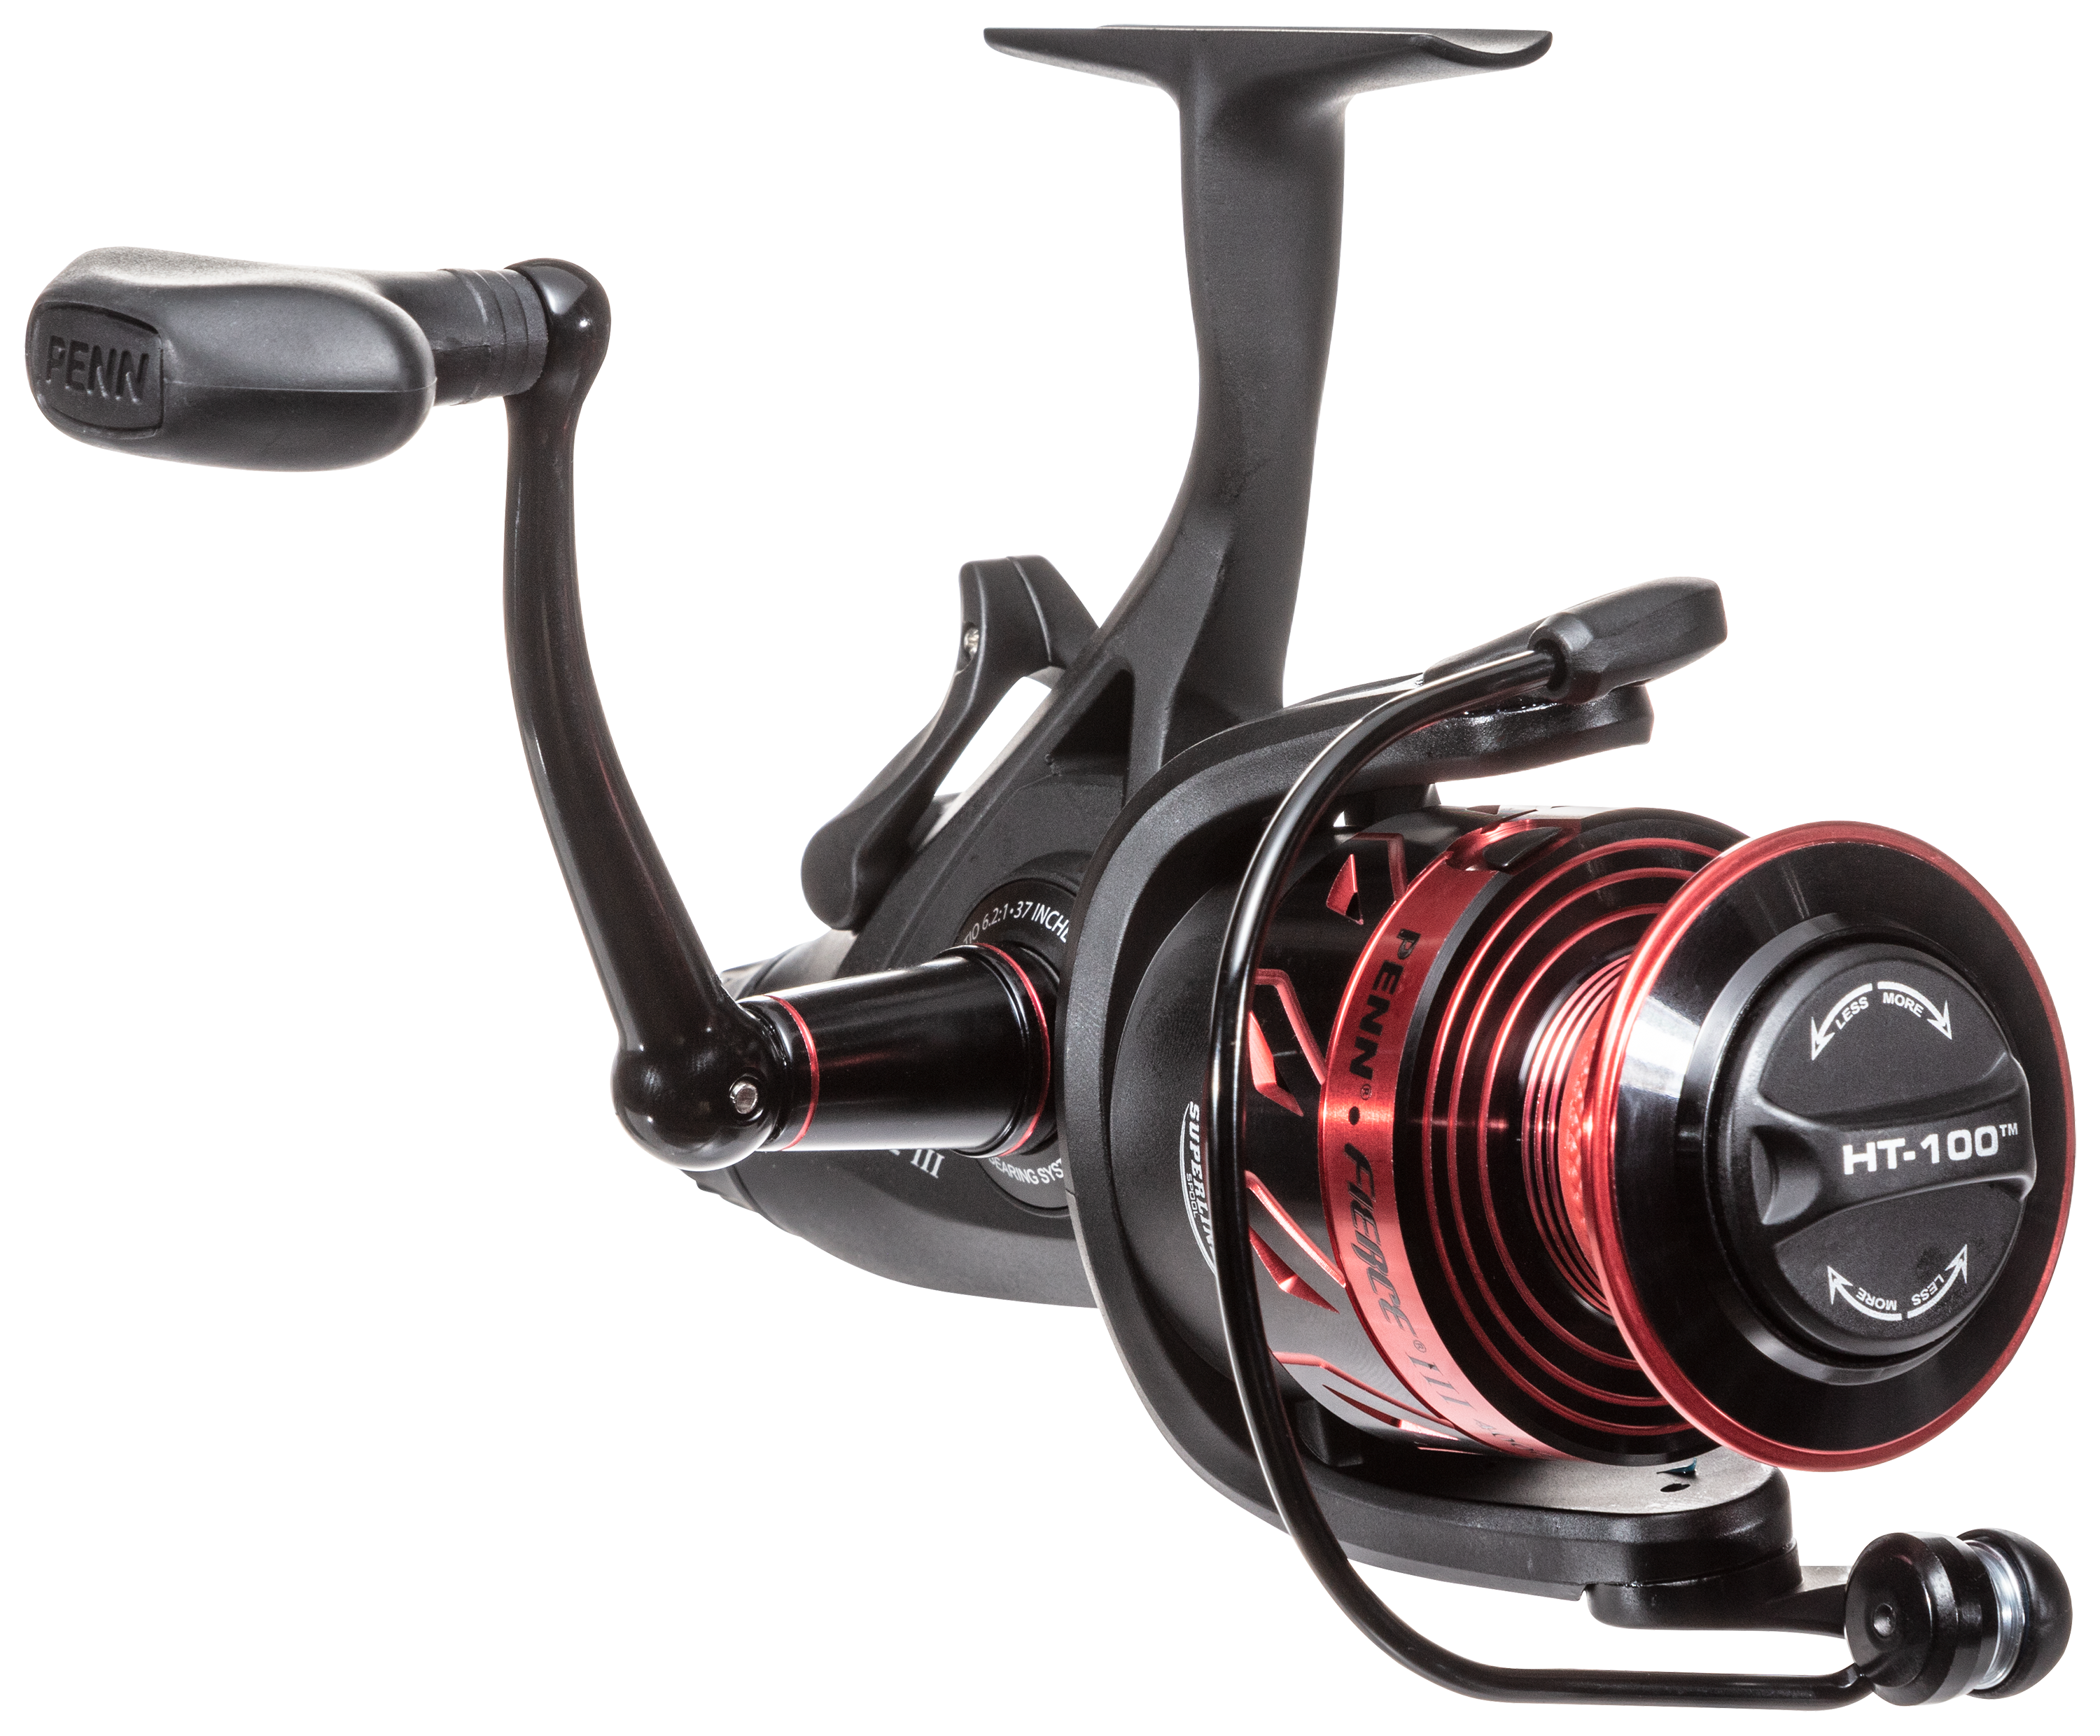  Penn Fierce Iii Live Liner Spinning Fishing Reel, Red, Black,  6000 - Plastic Clam : Sports & Outdoors